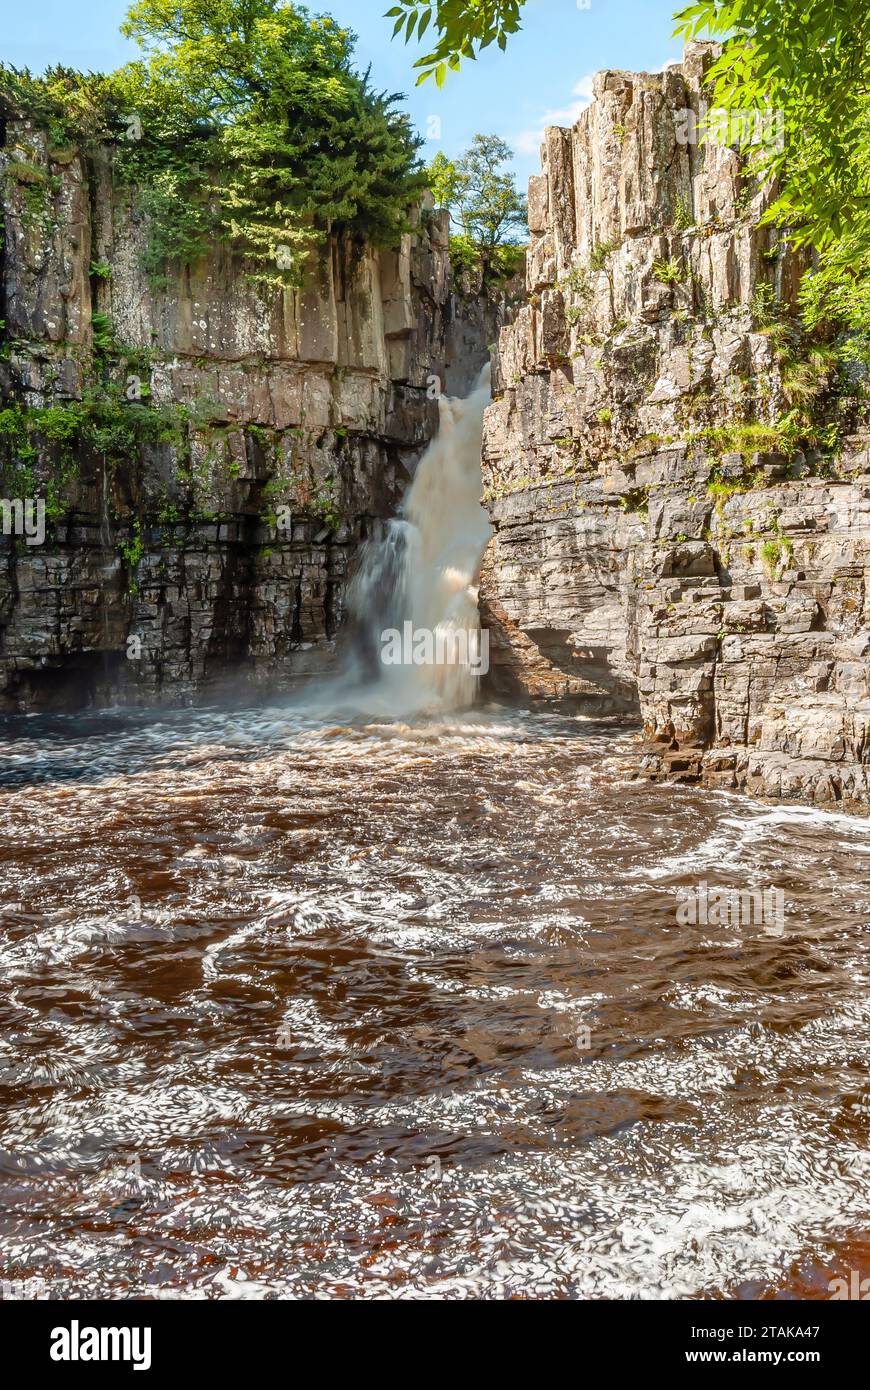 High Force, Englands highest Waterfall in Middleton-in-Teesdale, North England Stock Photo